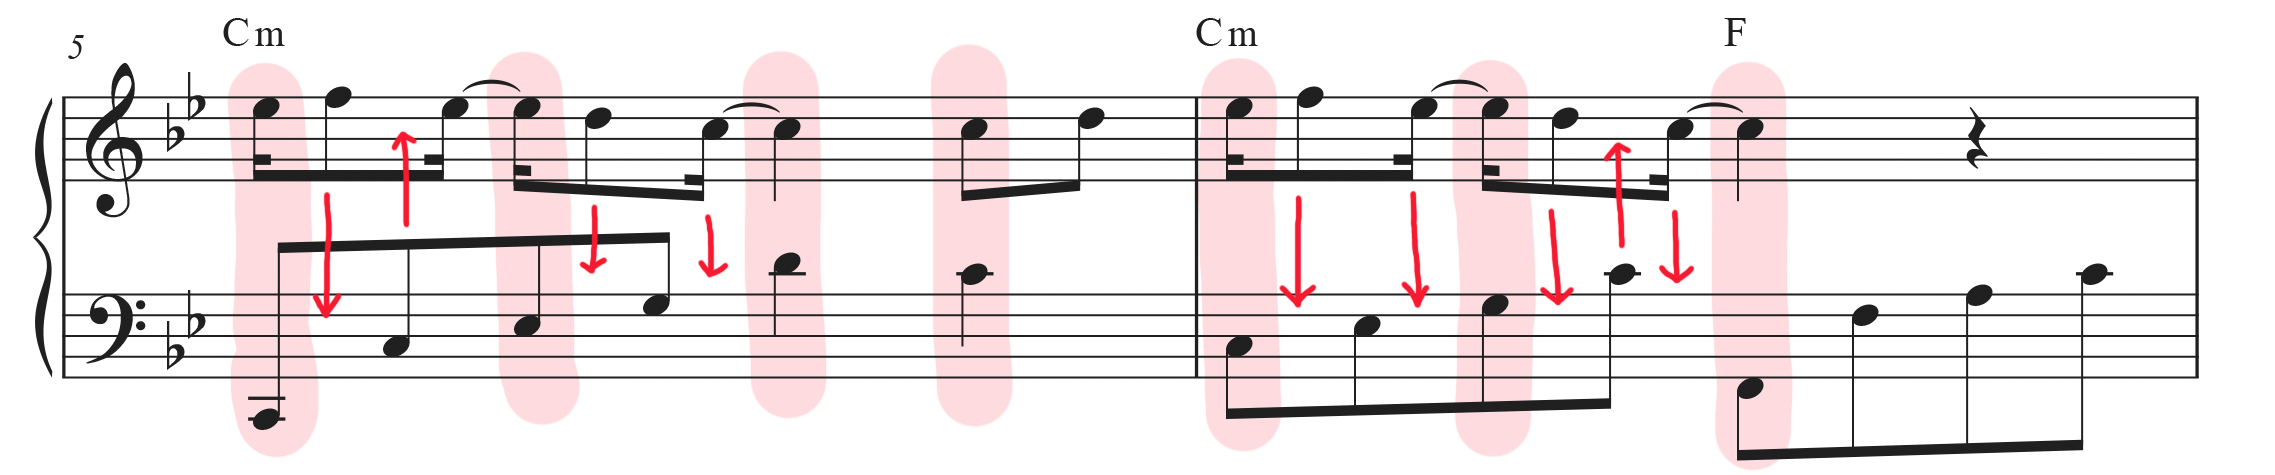 Measures 5-6 sheet music with arrows showing where notes match up.